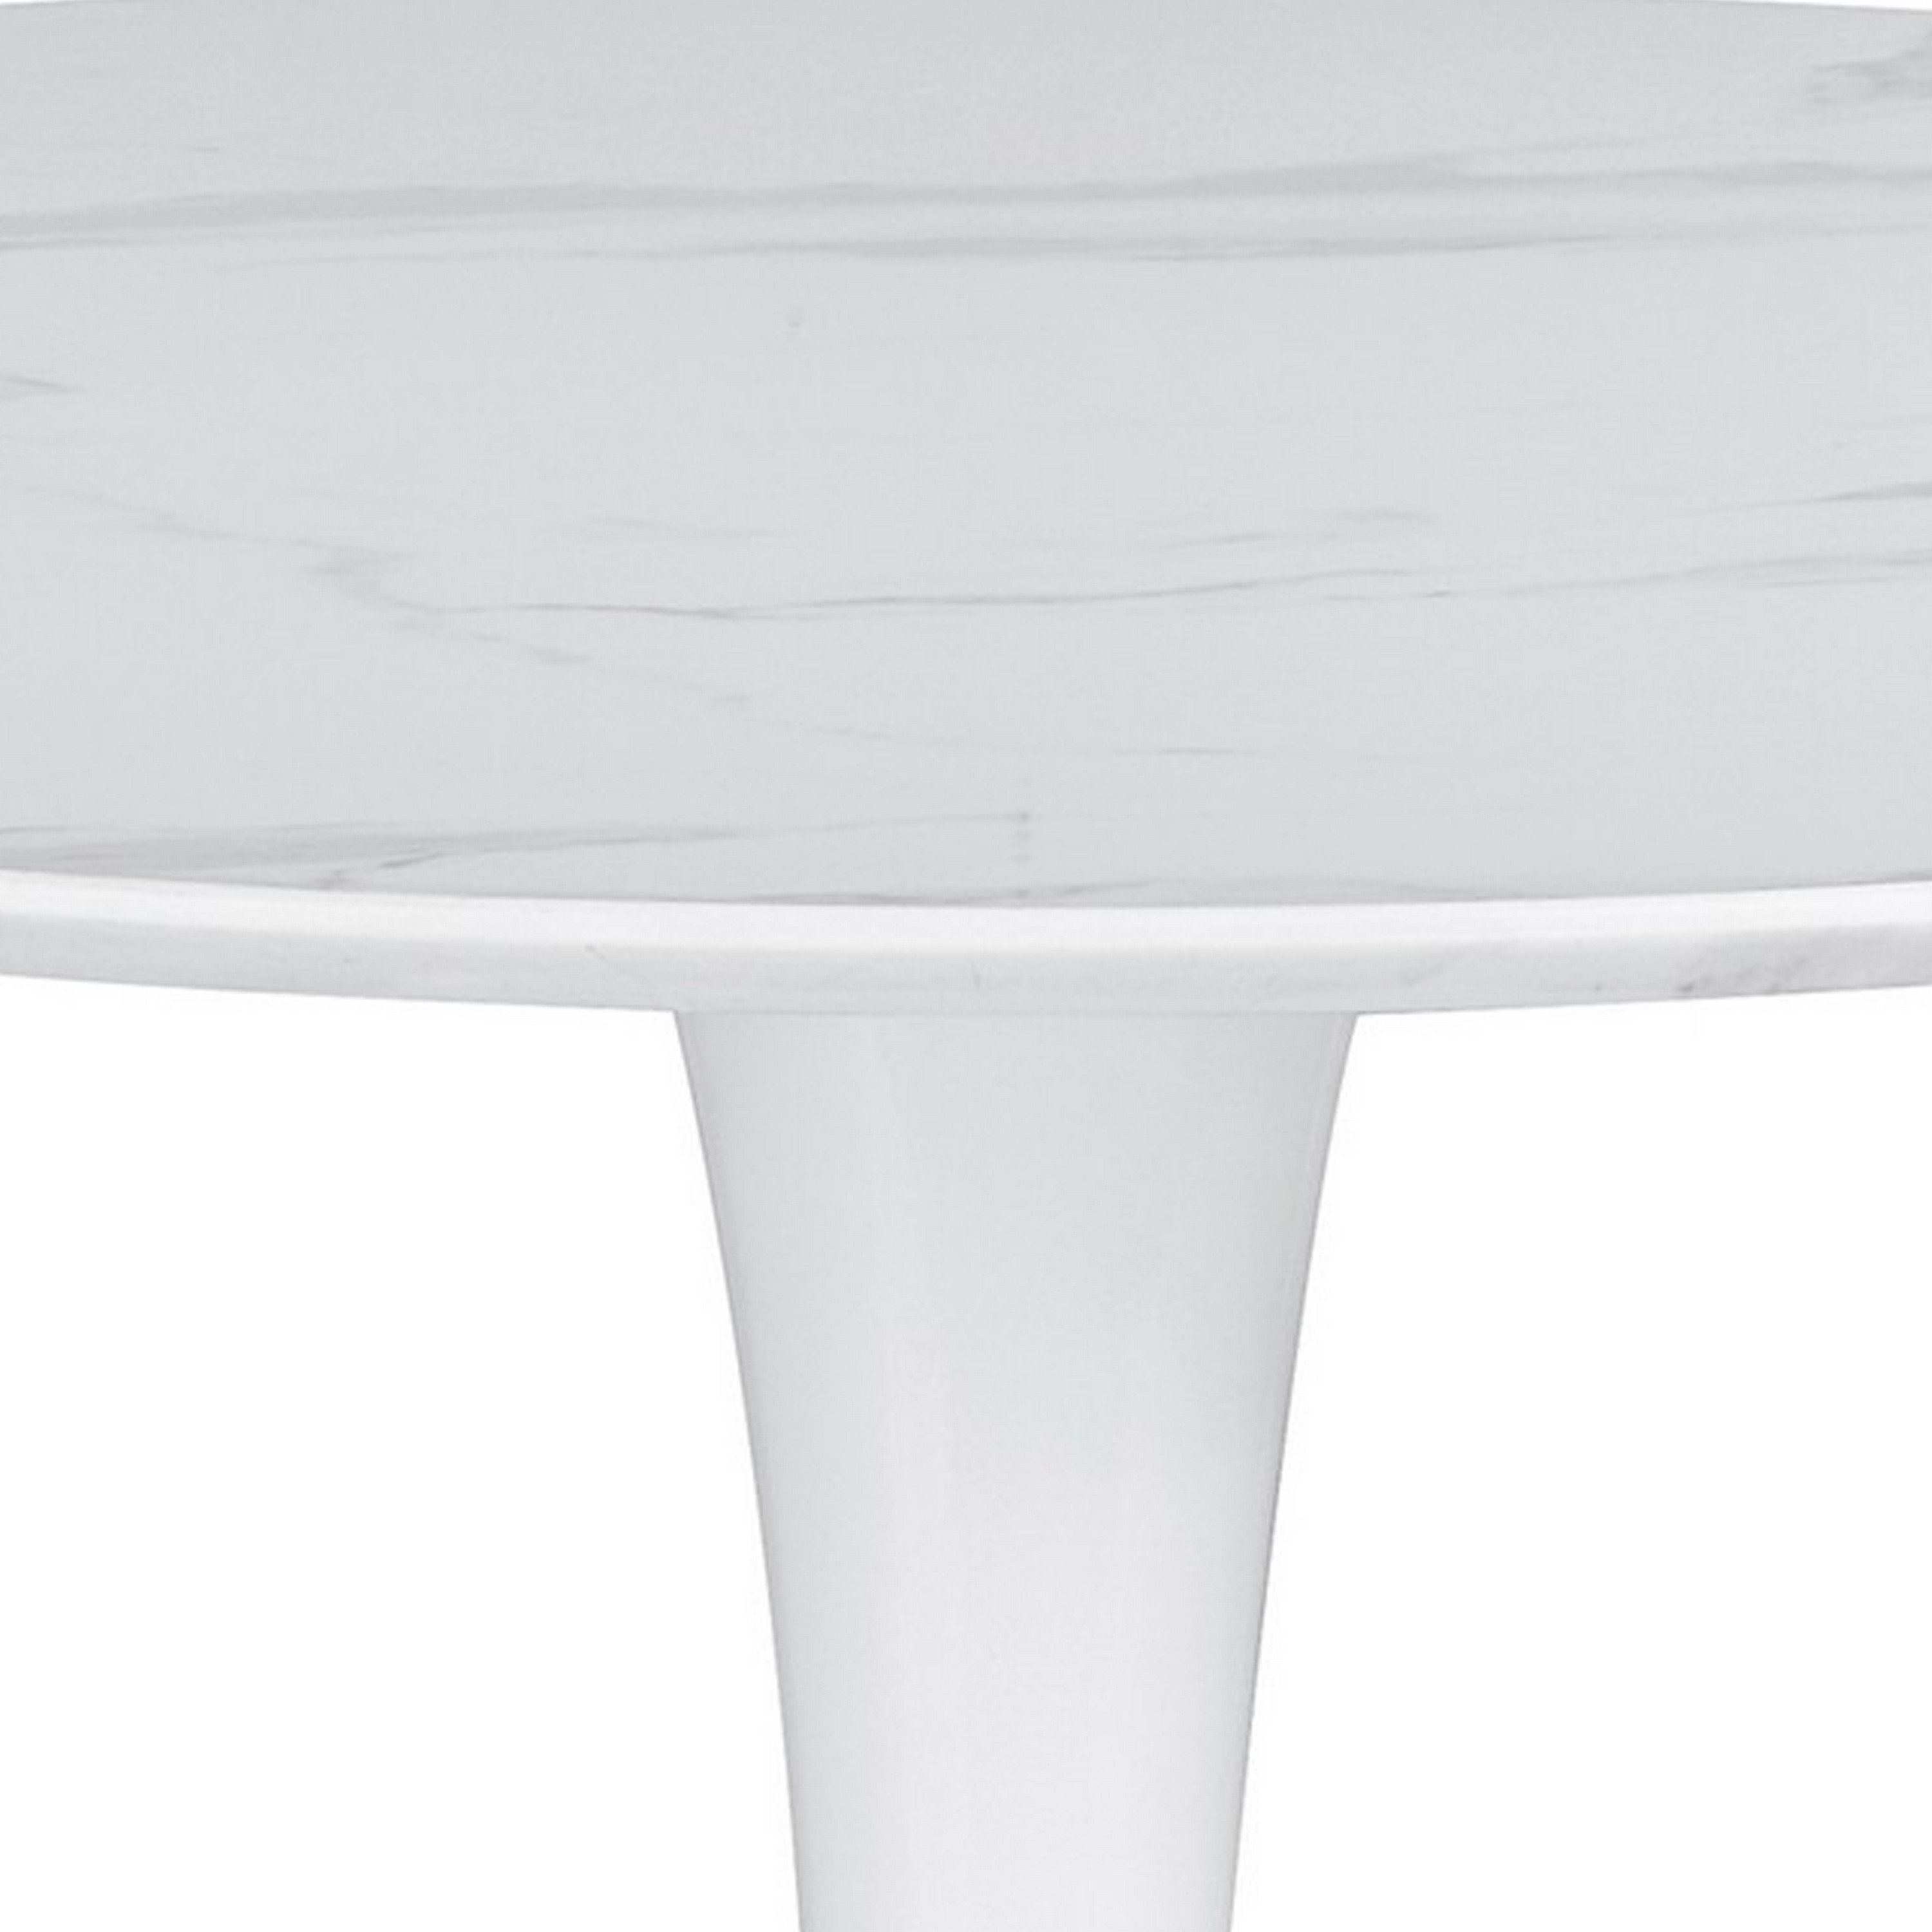 Loxi 30 Inch Round Dining Table, White Faux Marble Top, Tulip Accent Body- Saltoro Sherpi